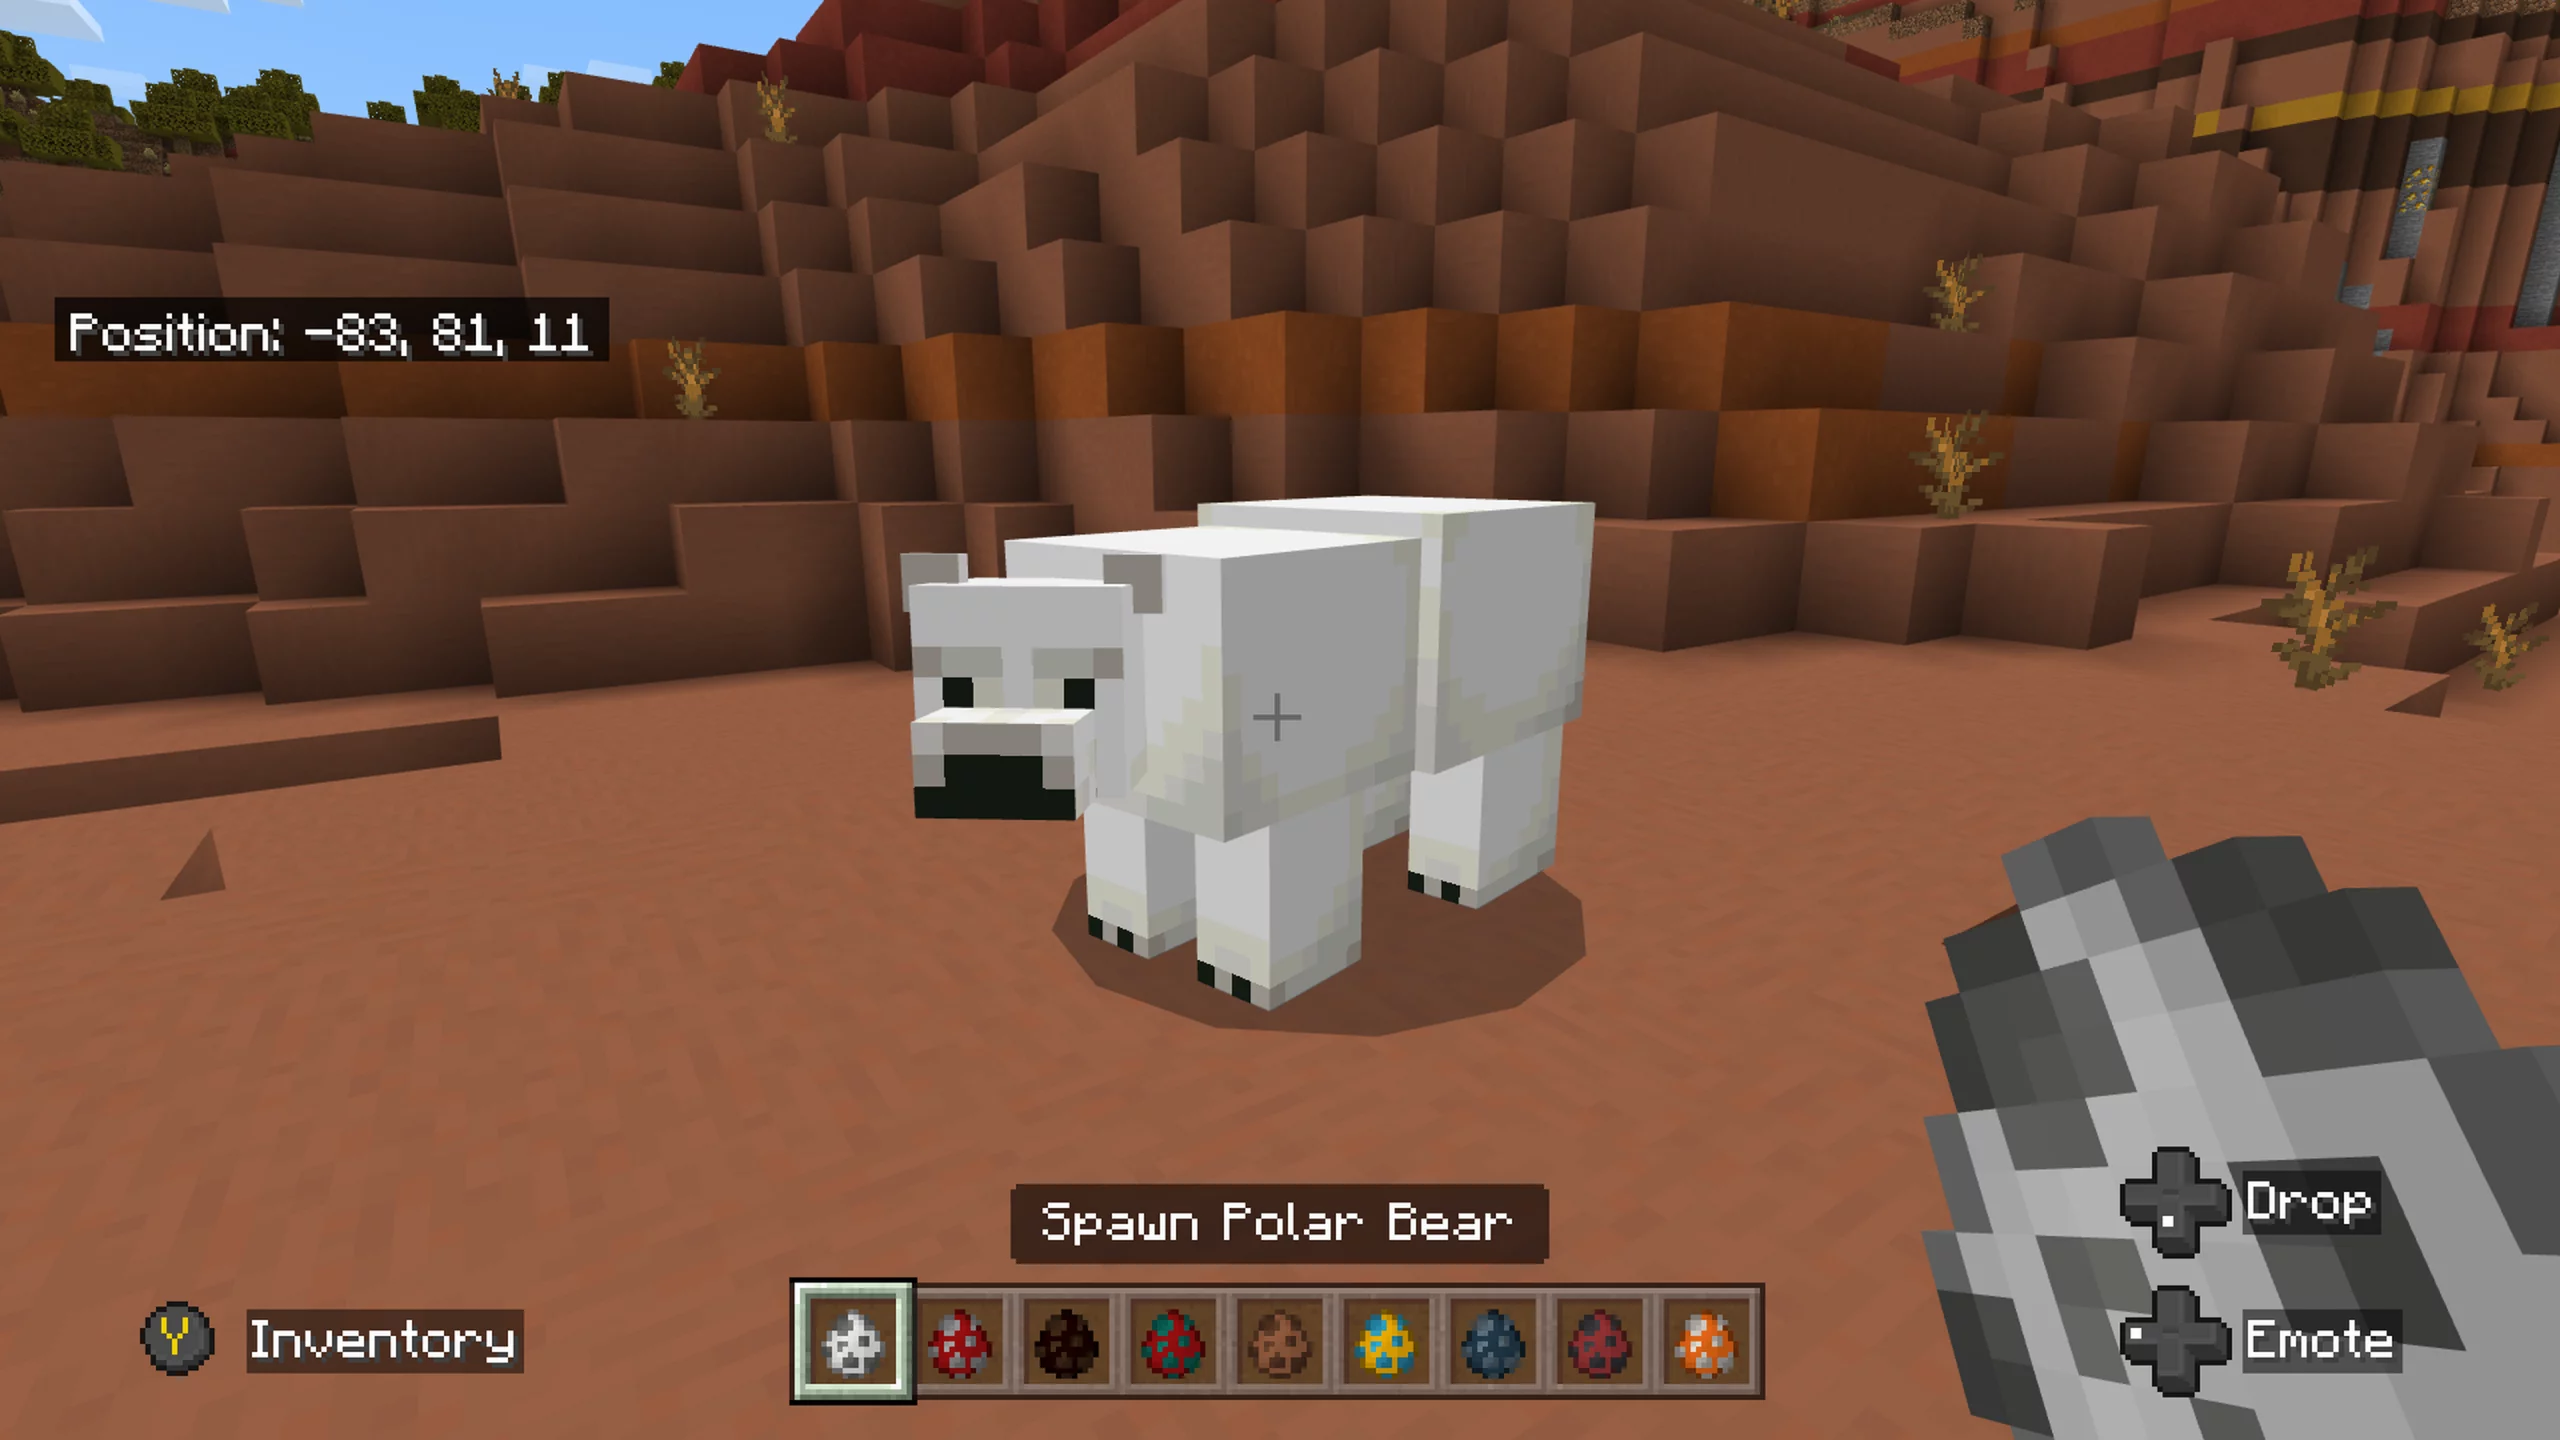 How to Find Polar Bears in Minecraft